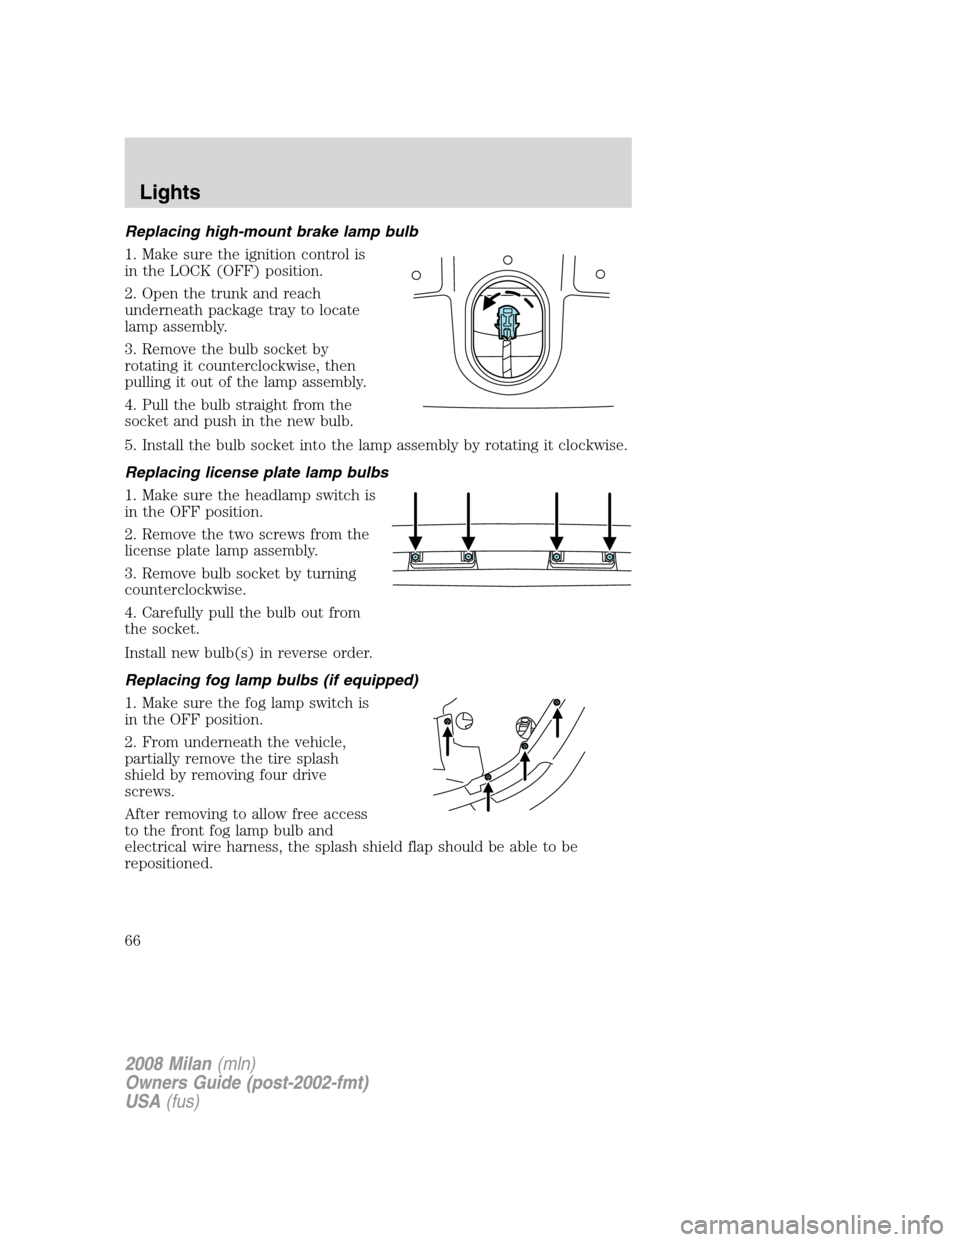 Mercury Milan 2008  s User Guide Replacing high-mount brake lamp bulb
1. Make sure the ignition control is
in the LOCK (OFF) position.
2. Open the trunk and reach
underneath package tray to locate
lamp assembly.
3. Remove the bulb so